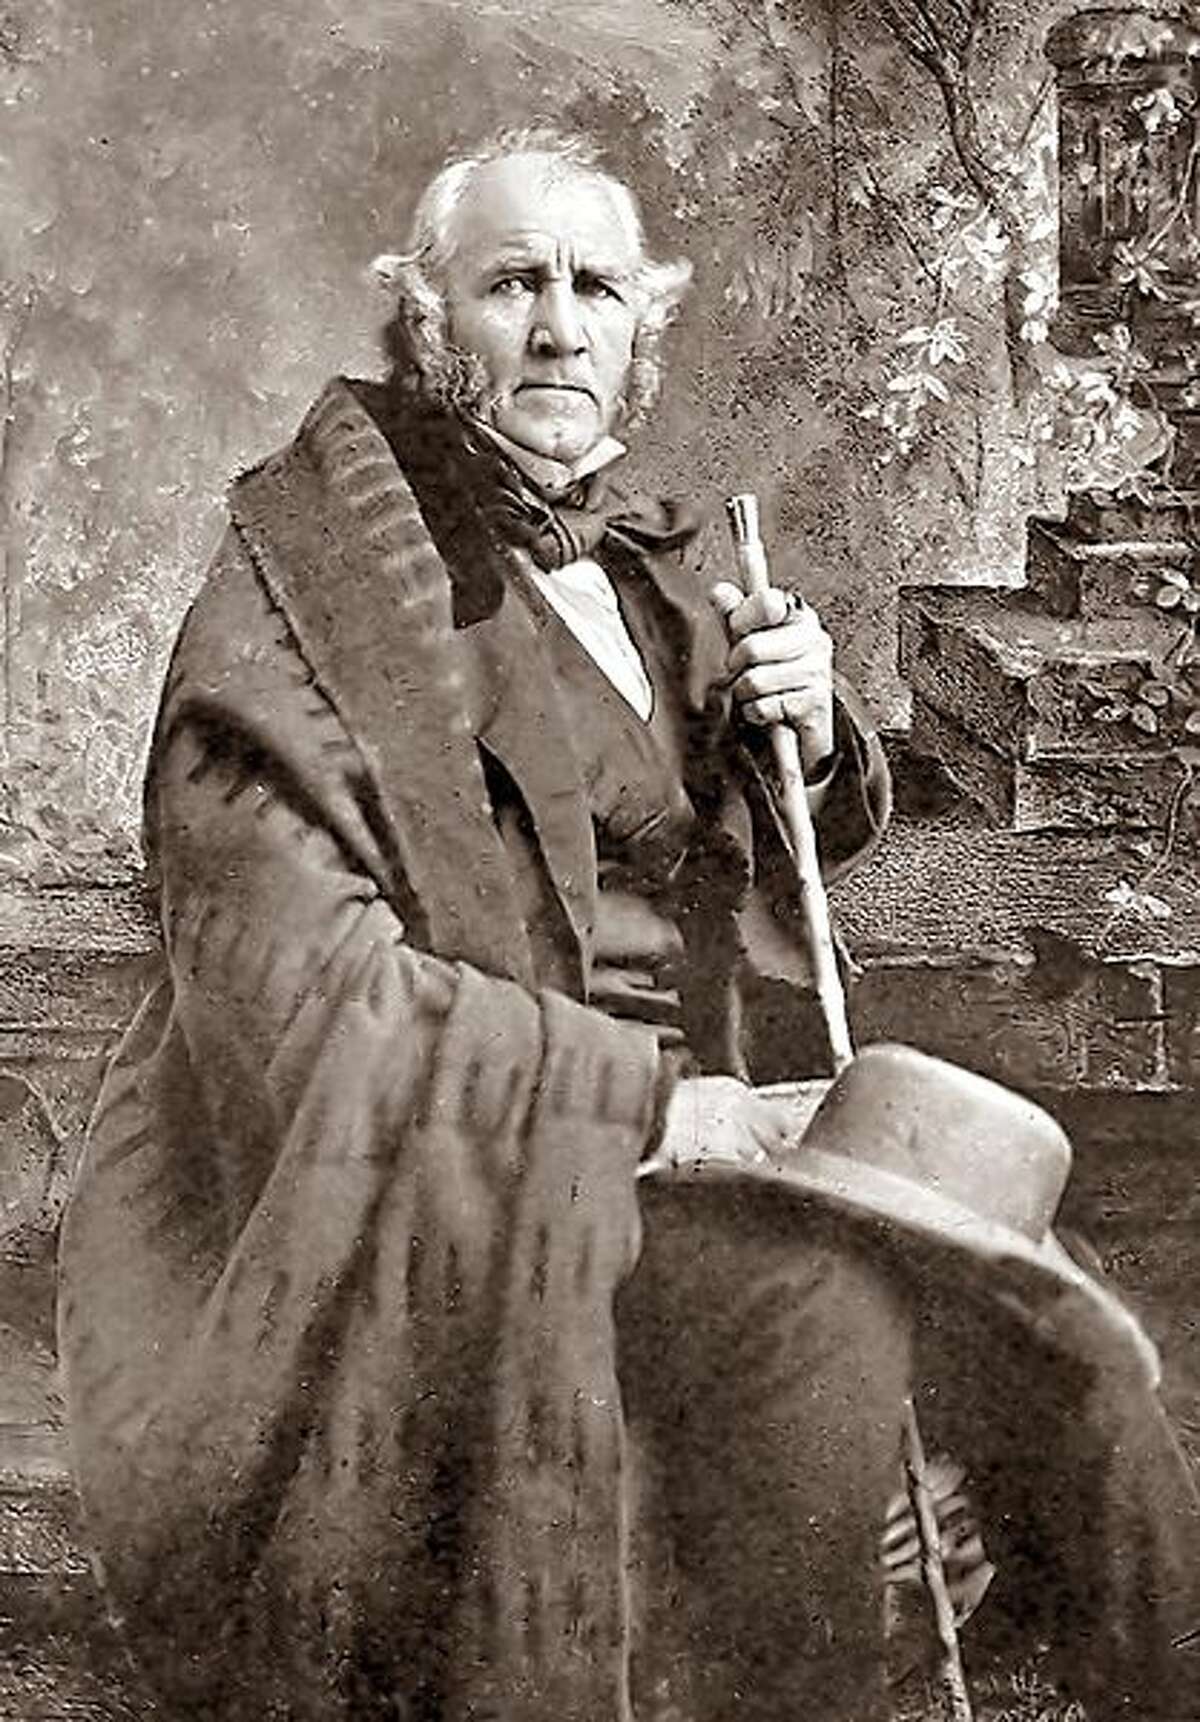 After the Texas Revolution, General Sam Houston became the first and third President of Texas, and U.S. Senator from Texas. They also happened to name a little town after him.